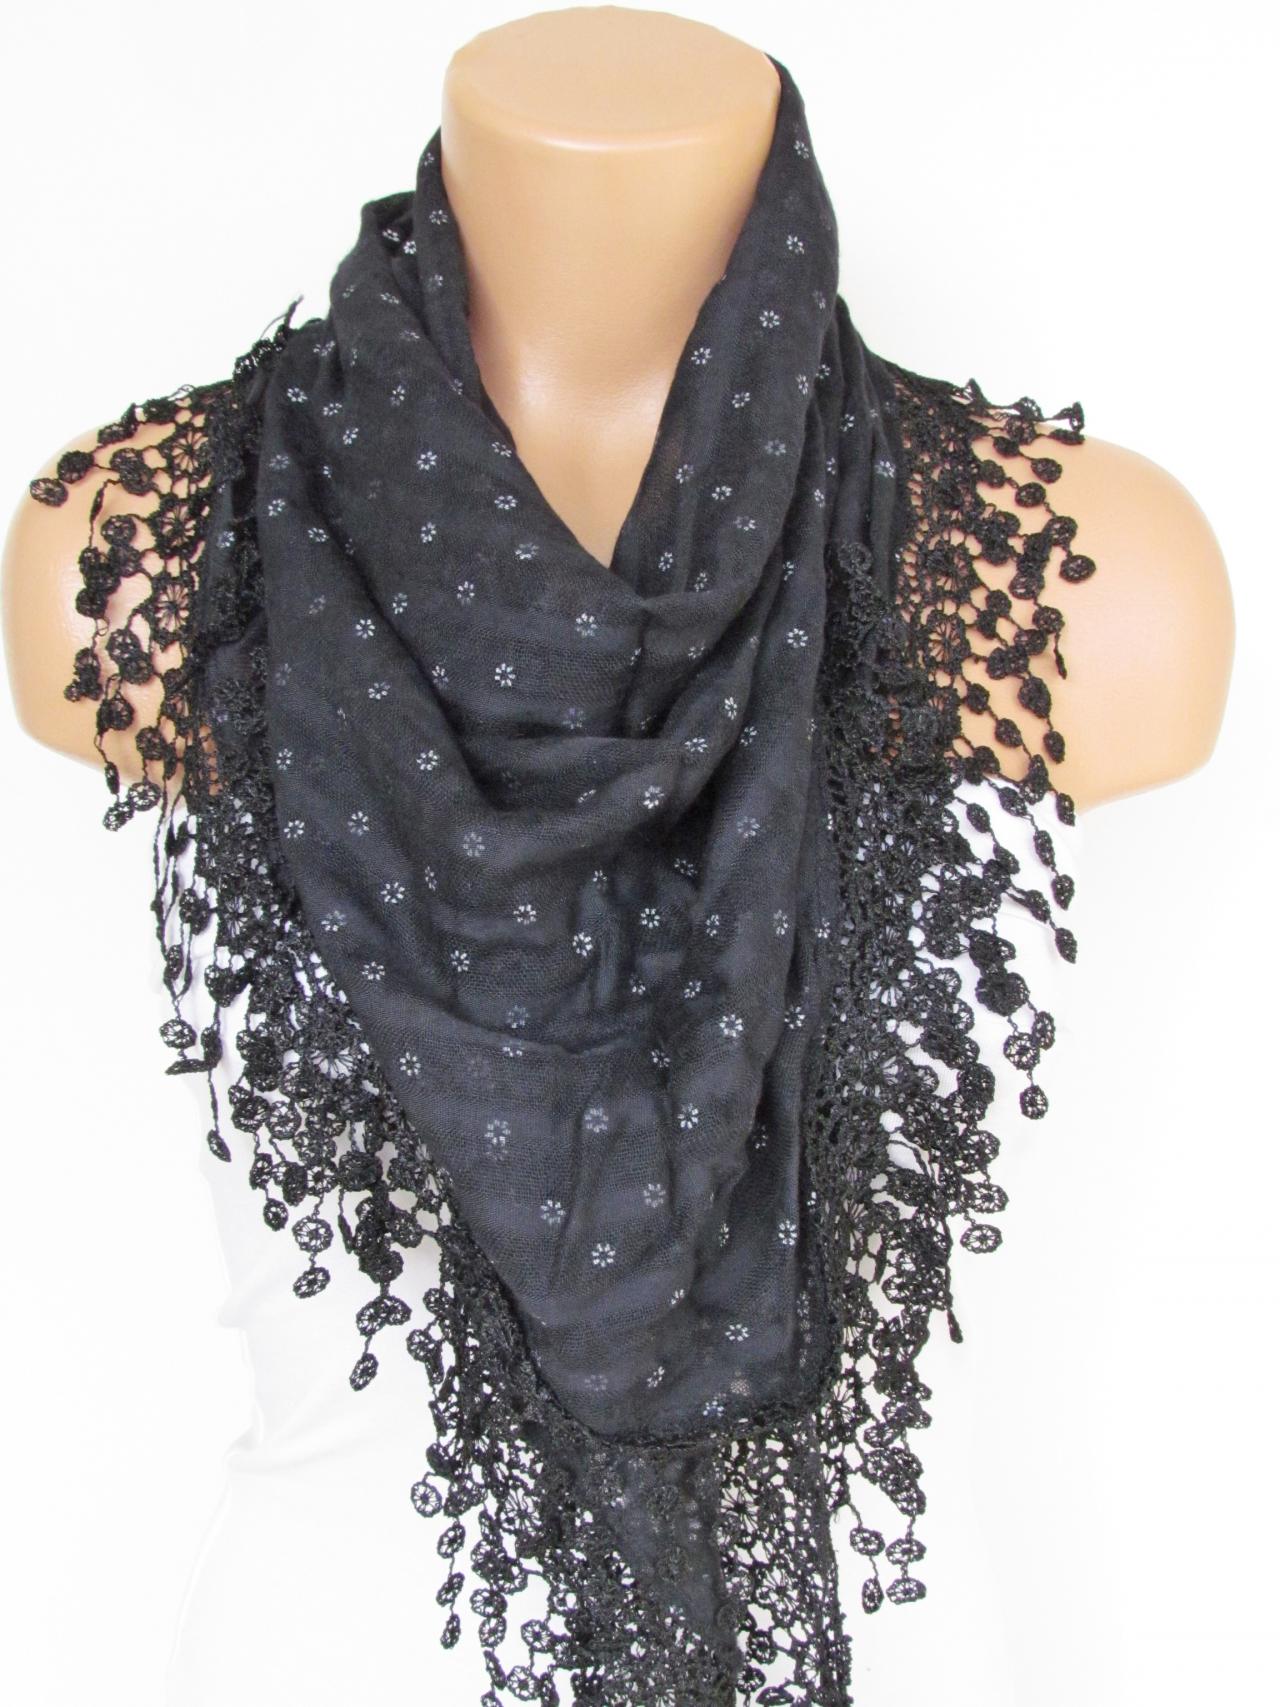 Black Scarf with fringe -Triangle Shawl Scarf-New Season-Necklace-Lariat- Neckwarmer- Infinity Scarf--Gift For Her